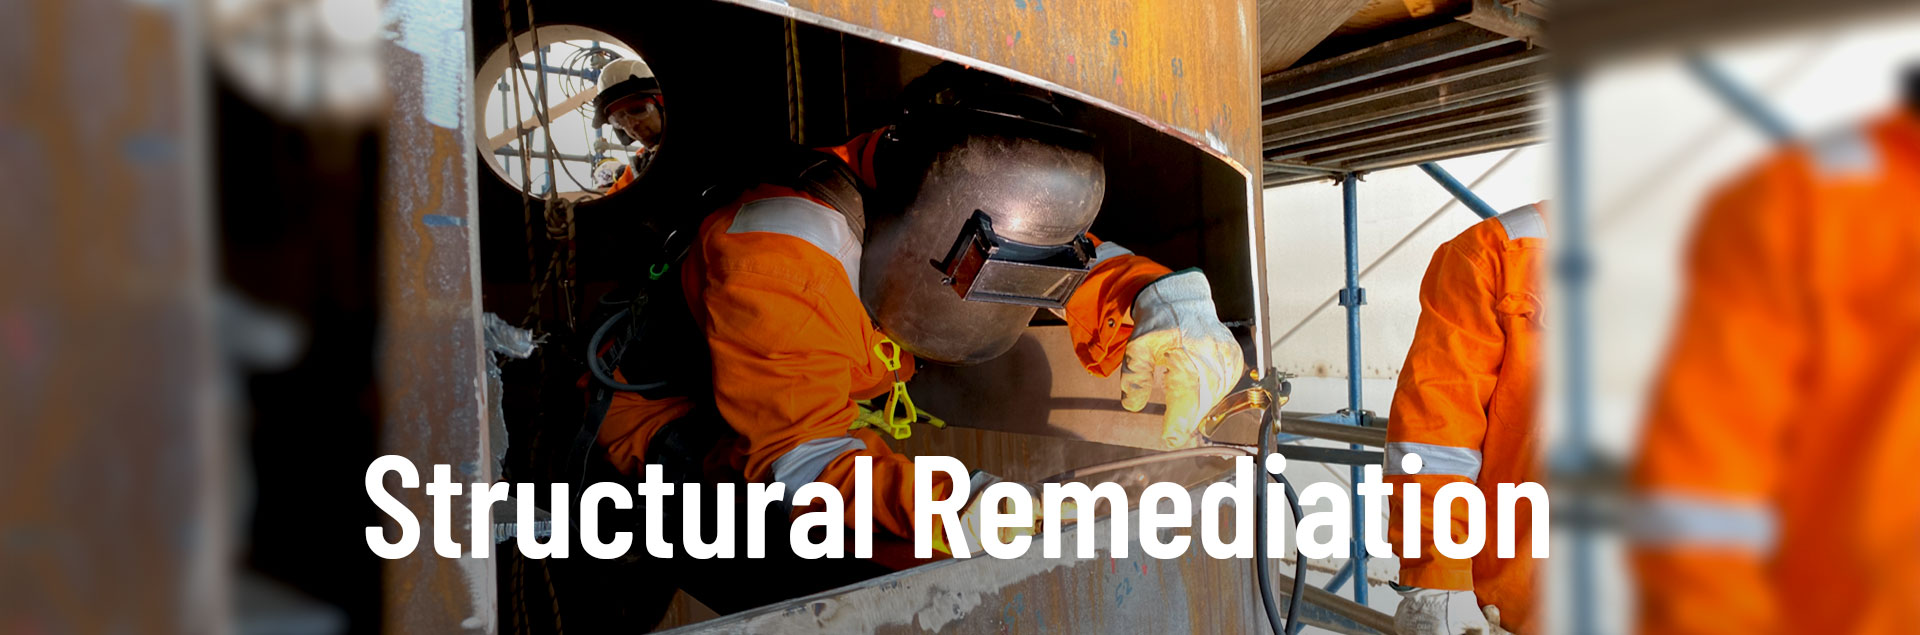 Structural Remediation